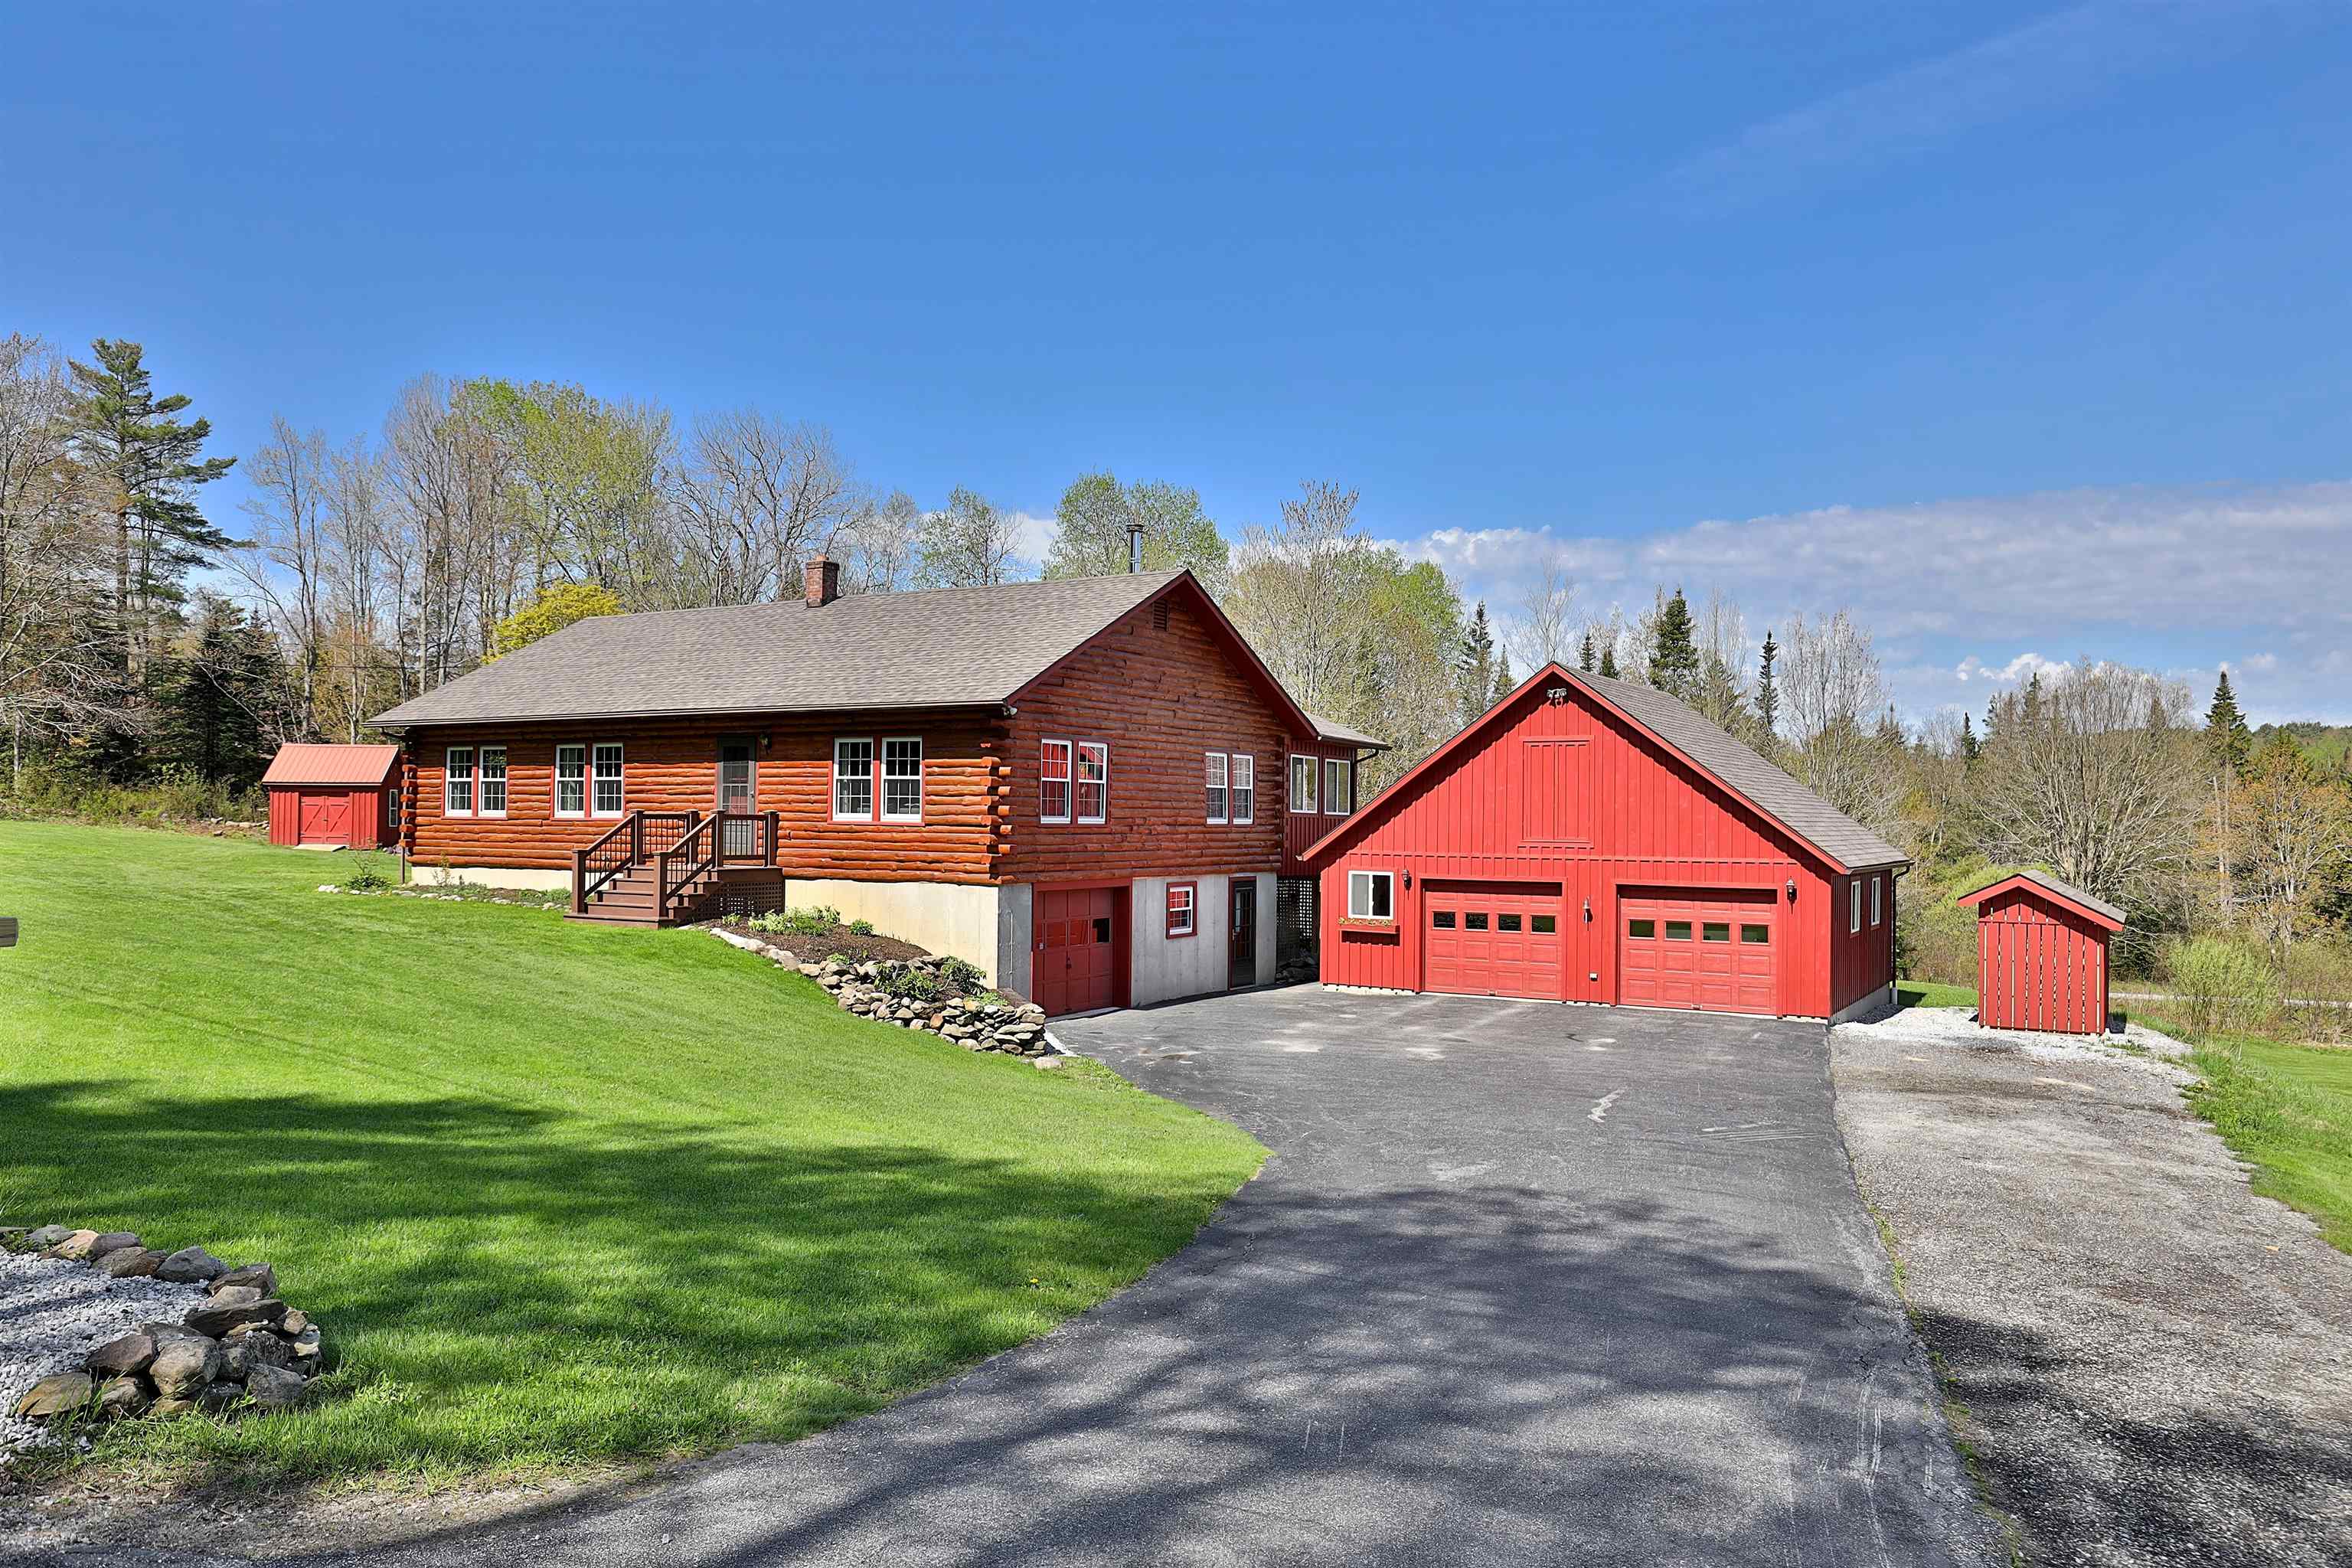 MOUNT HOLLY VT Homes for sale